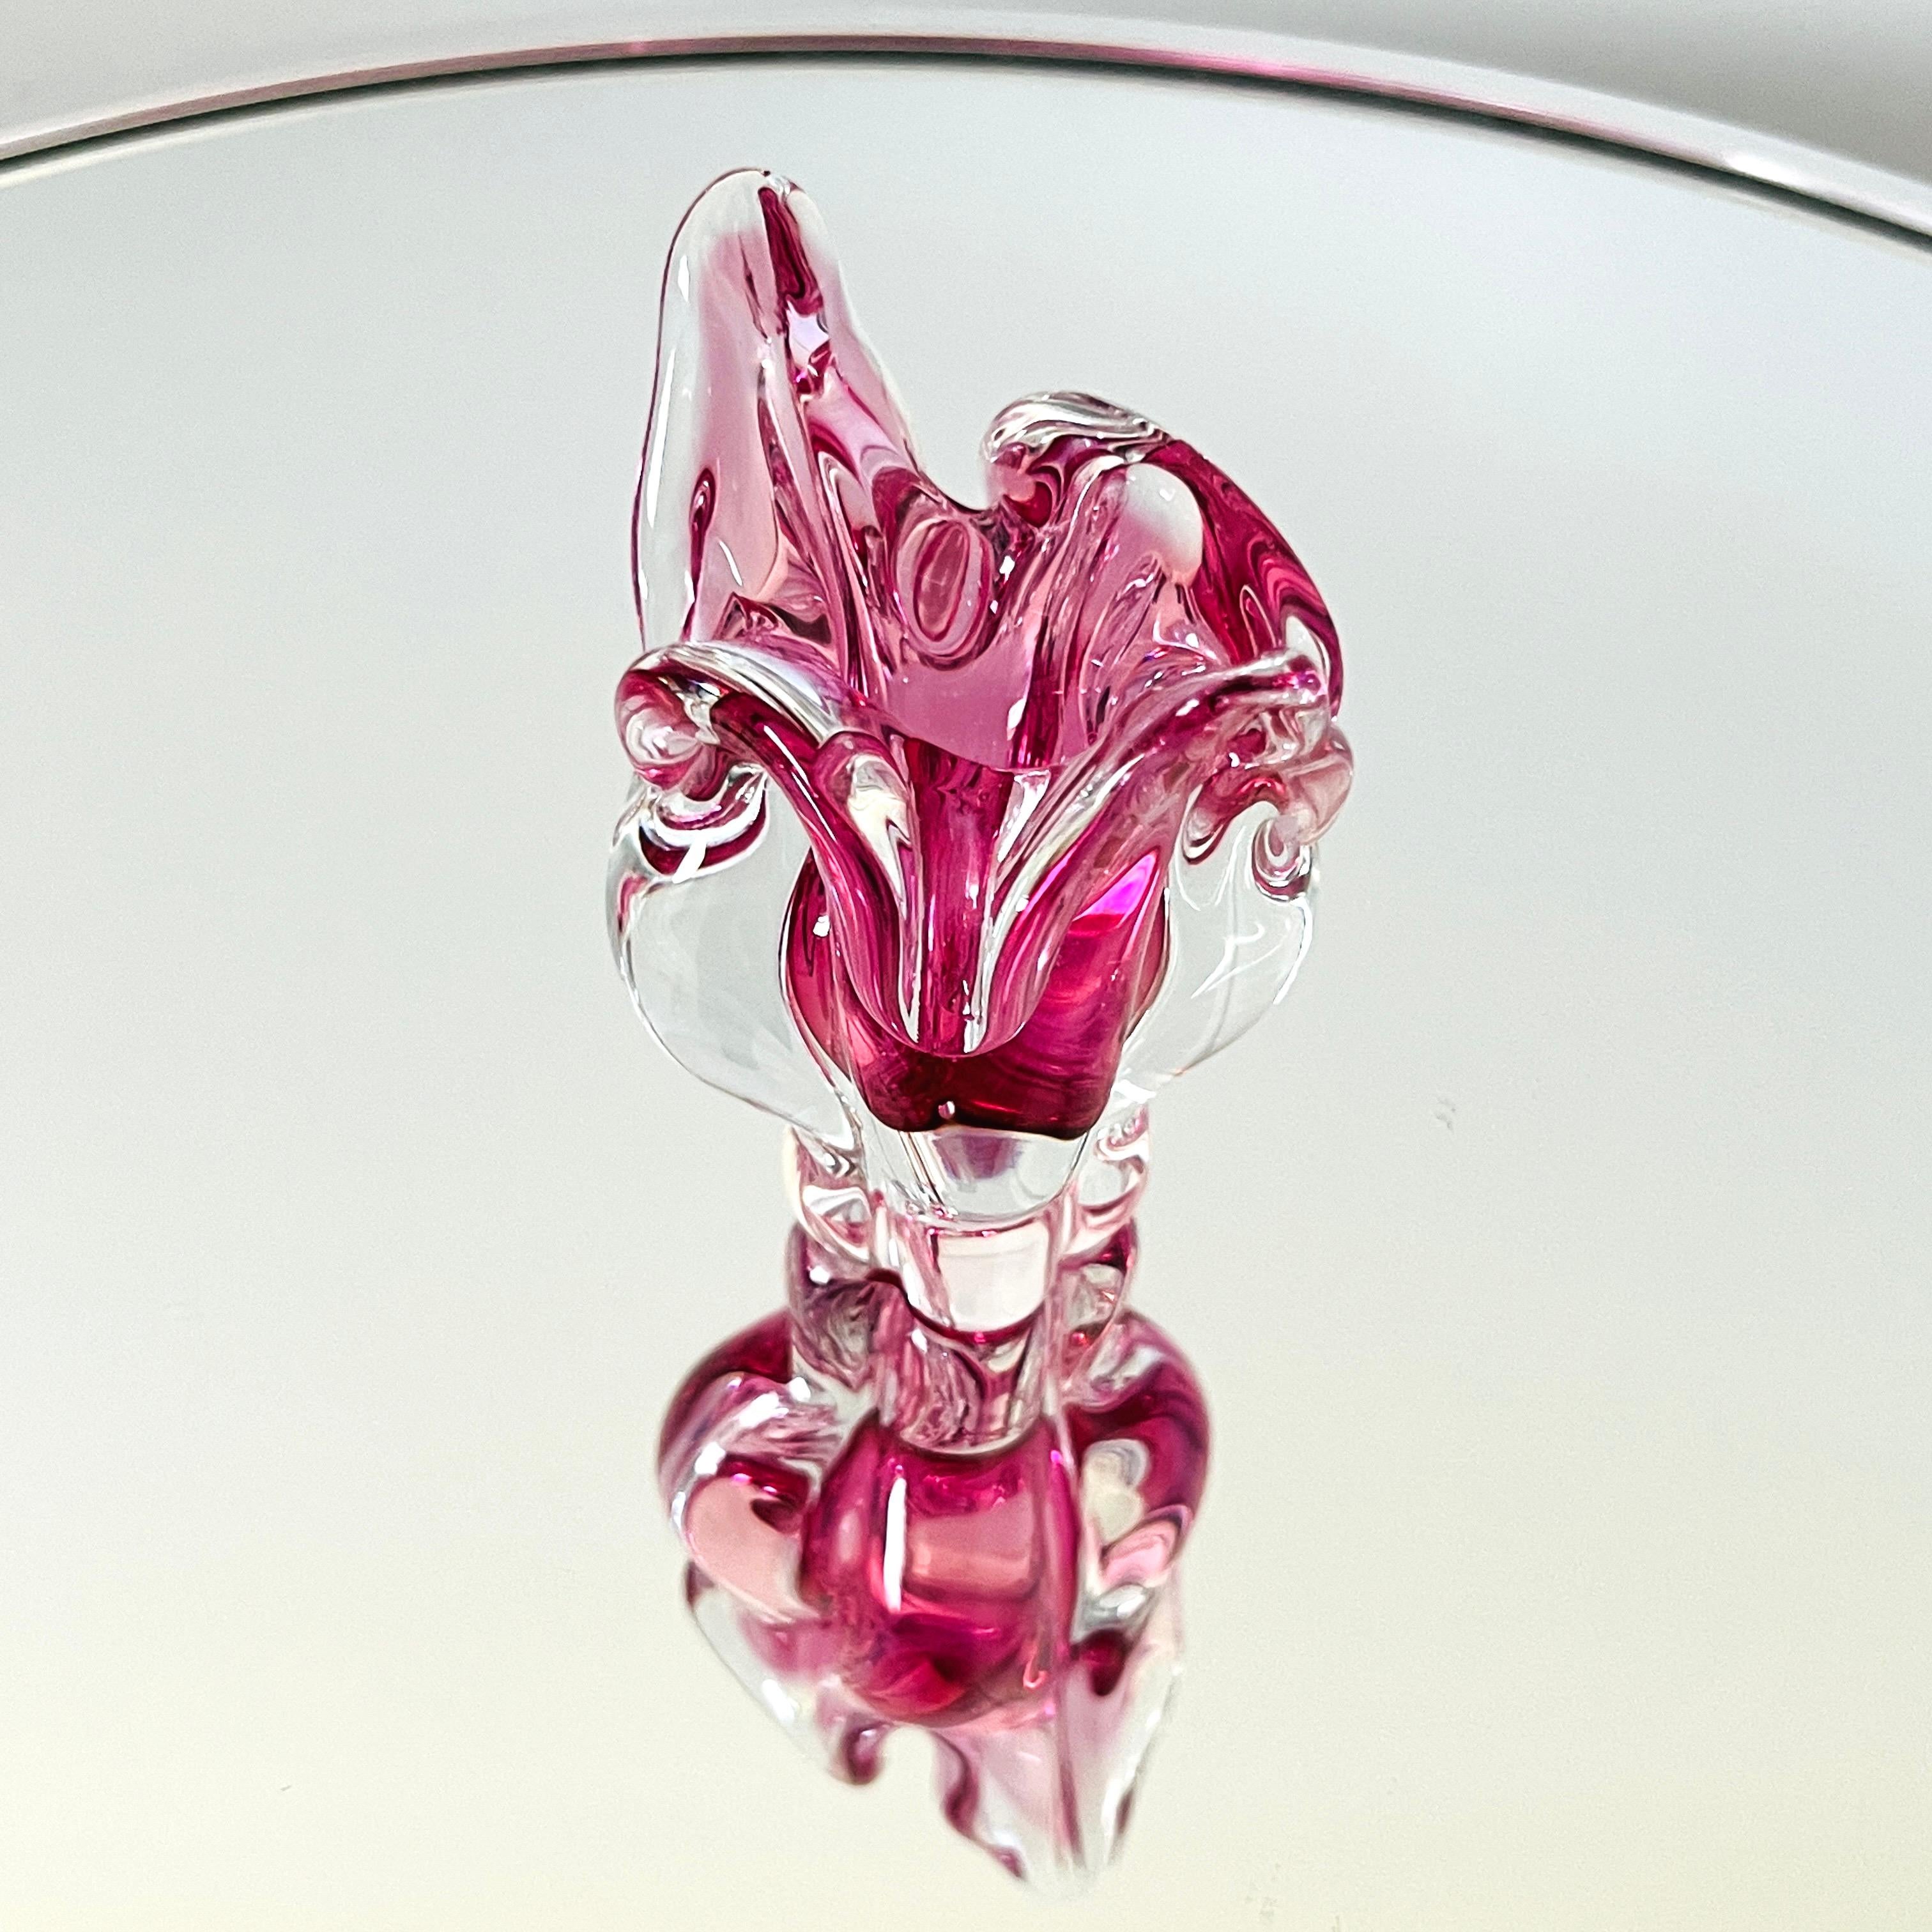 Small hand blown Murano glass vase in the shape of a stylized tulip. Beautiful prismatic design capturing light from all angles in hues of violet-pink. Made with Sommerso technique whereby colors are submerged within clear glass. Makes a great